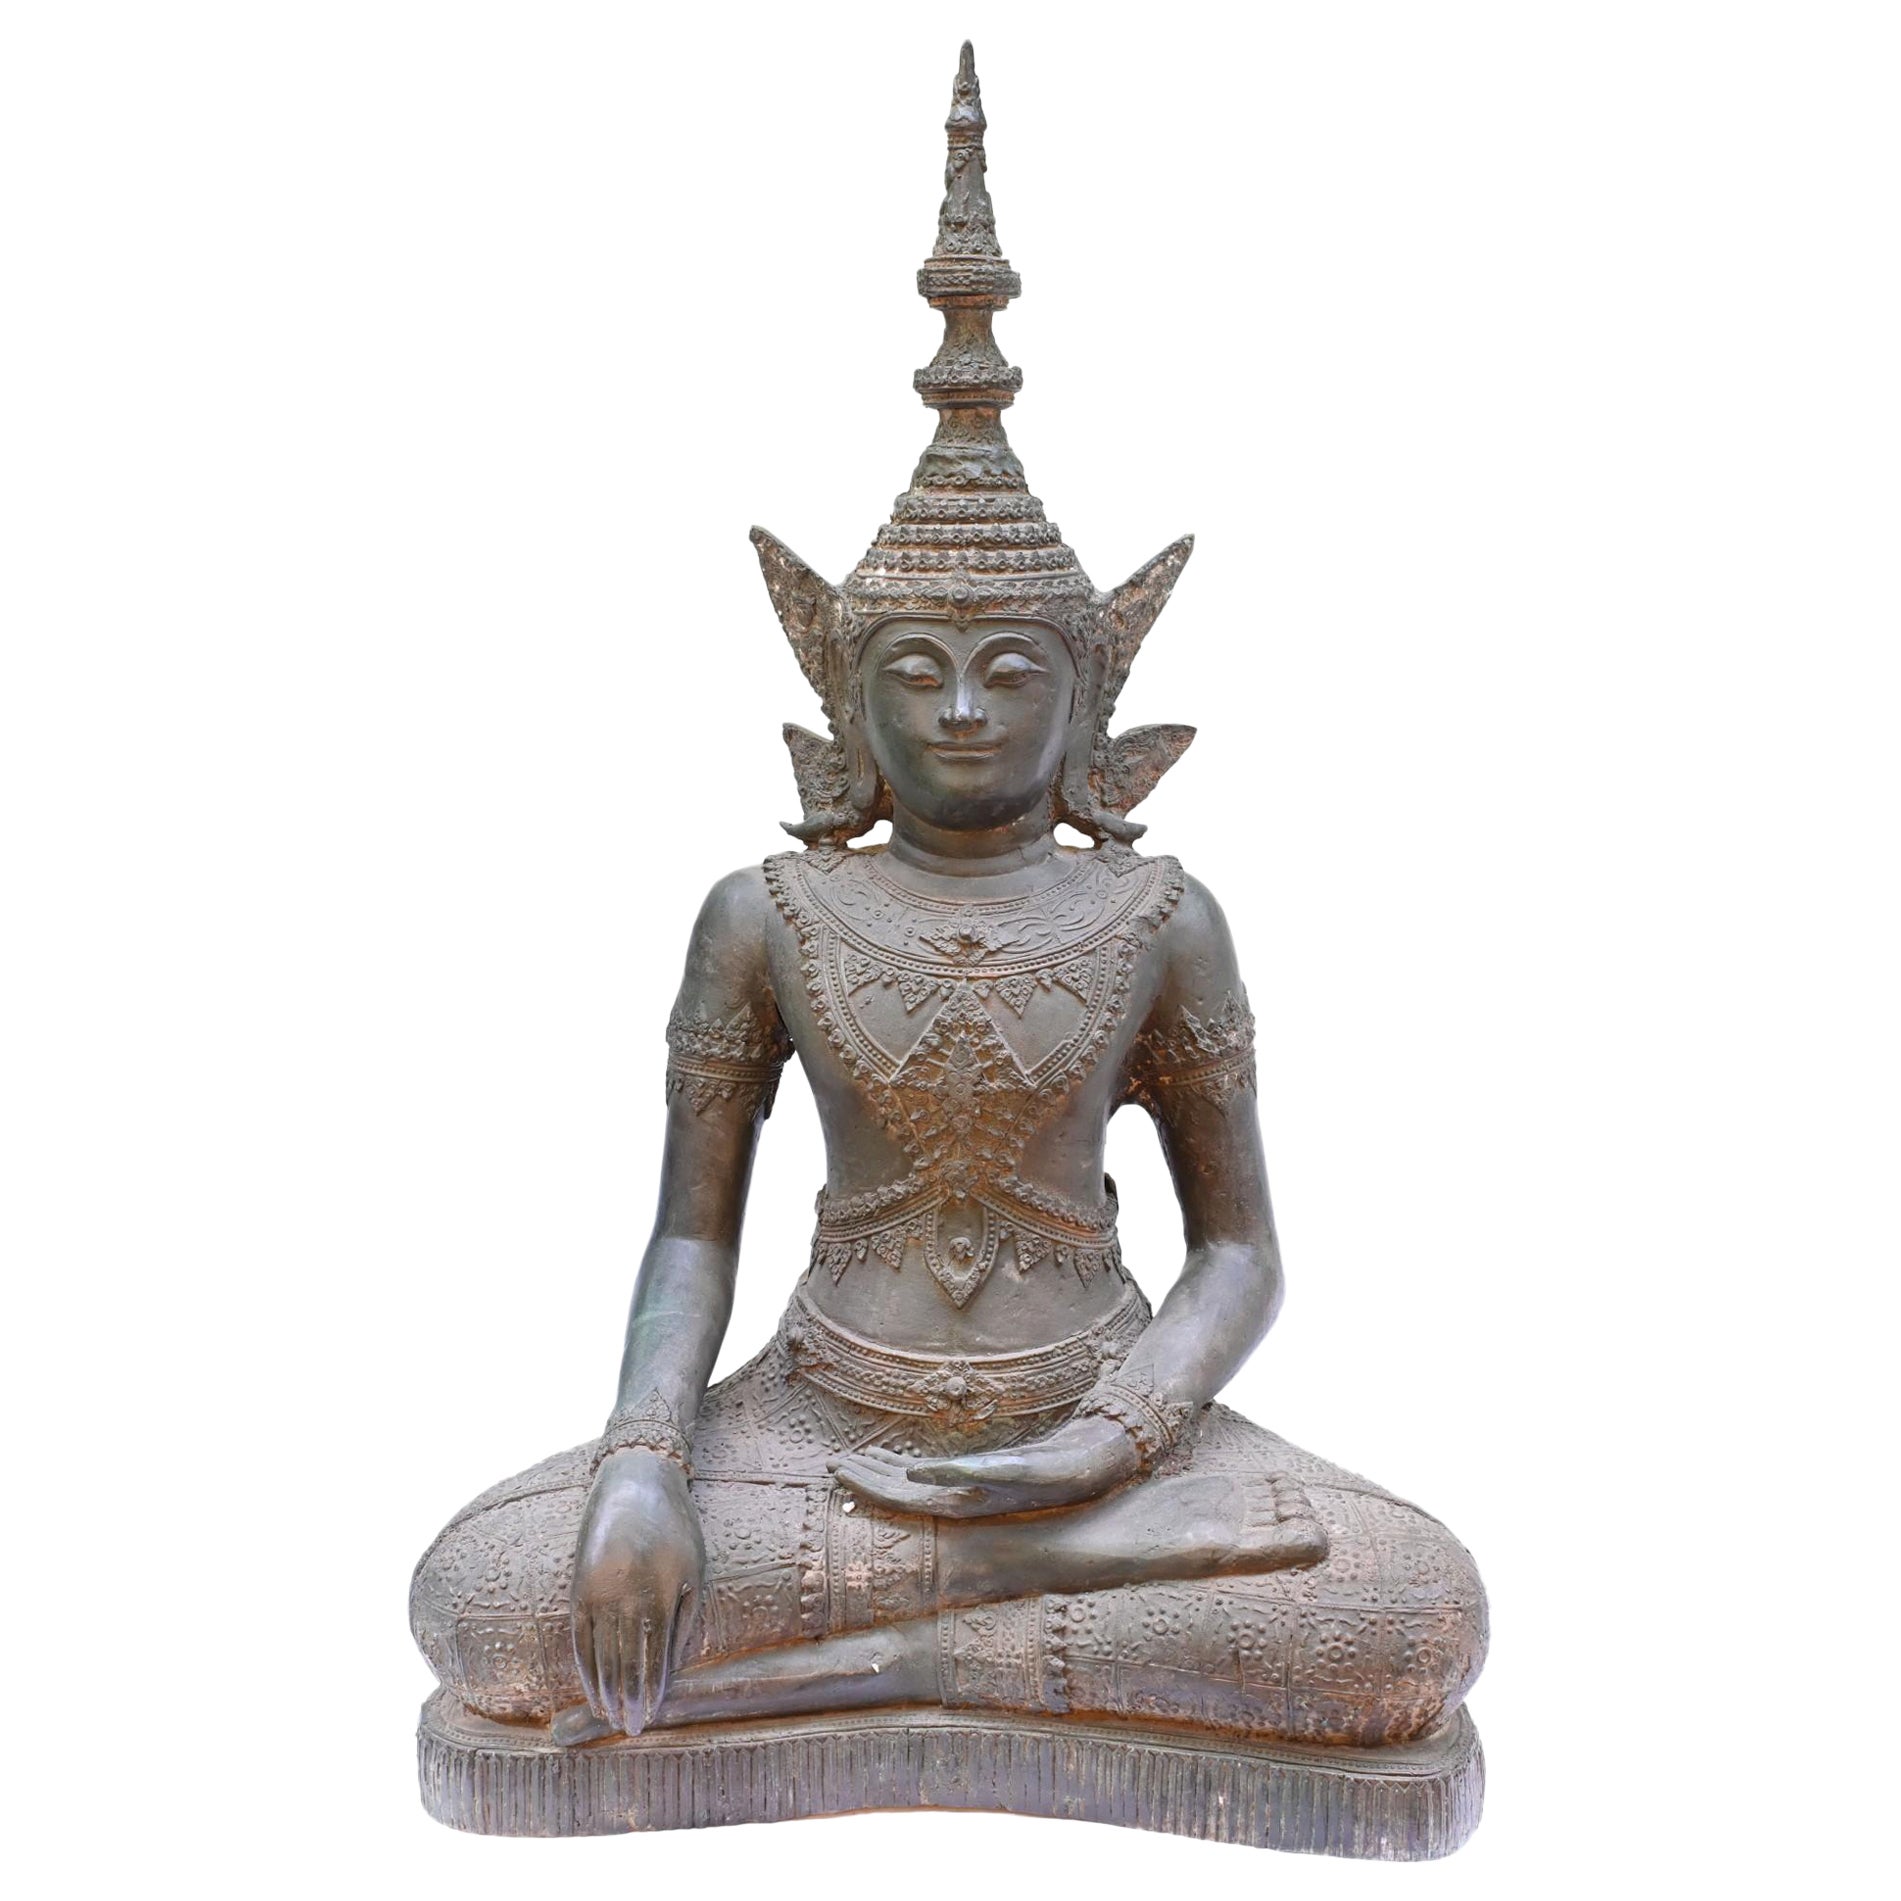 What is the purpose of Buddha statues?